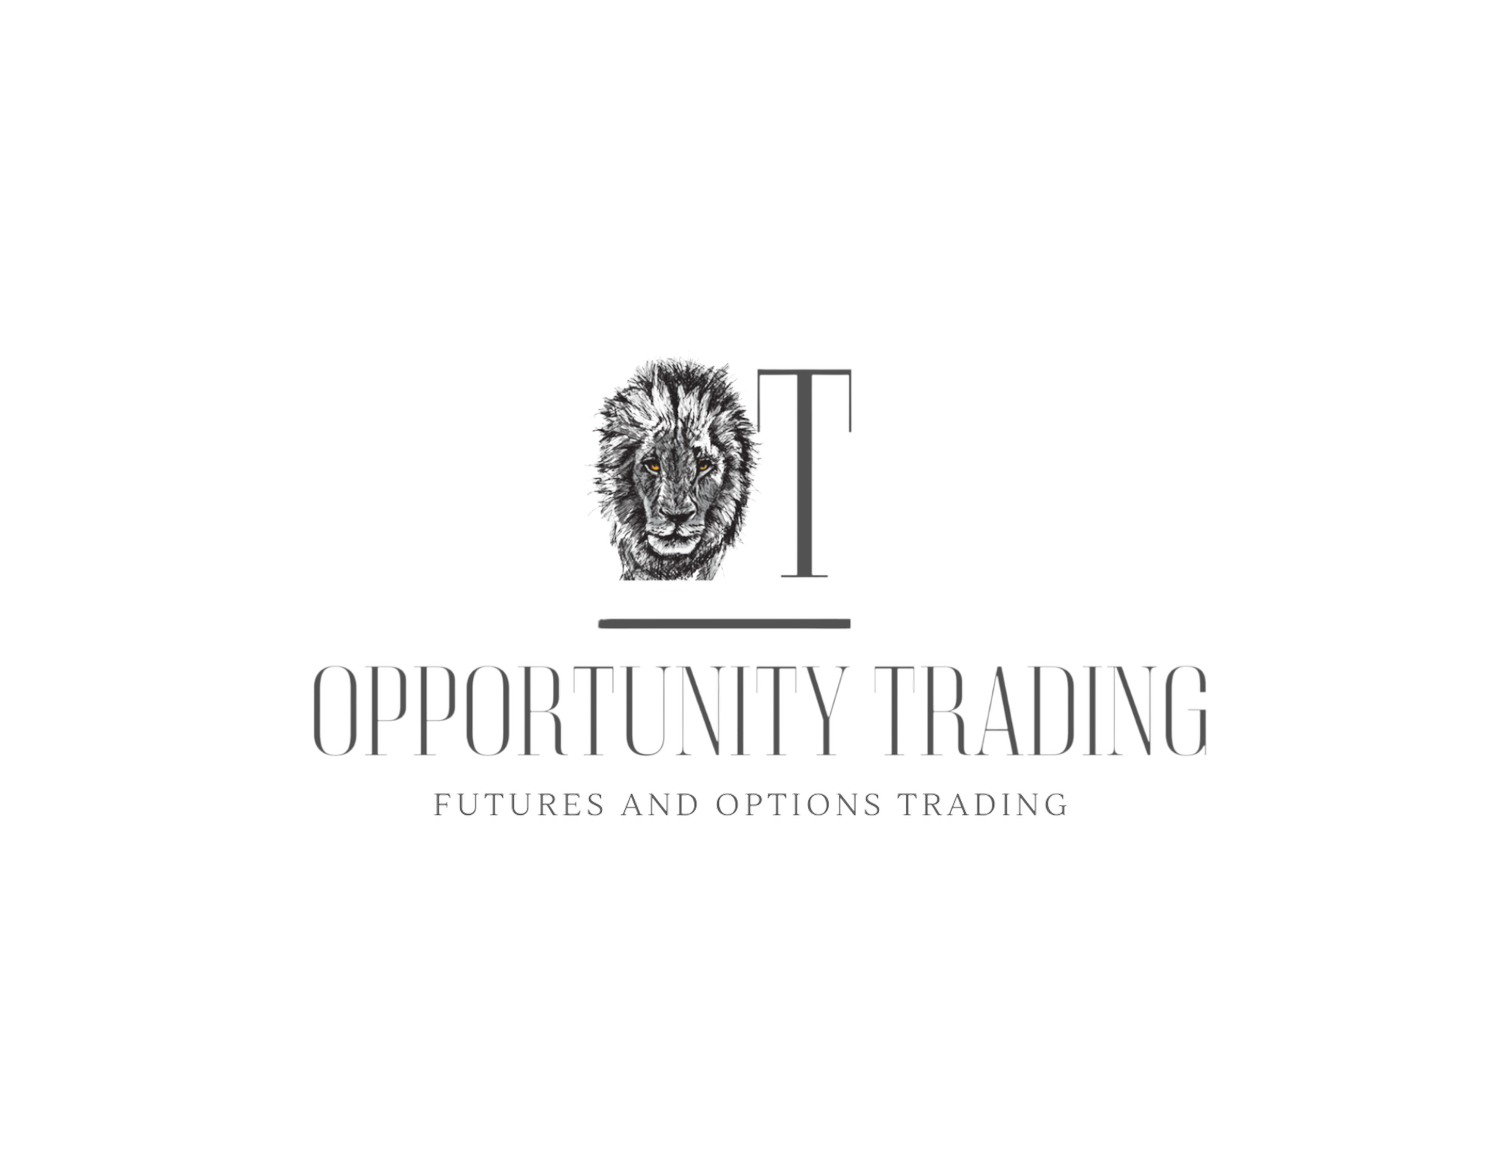 OPPORTUNITY TRADING